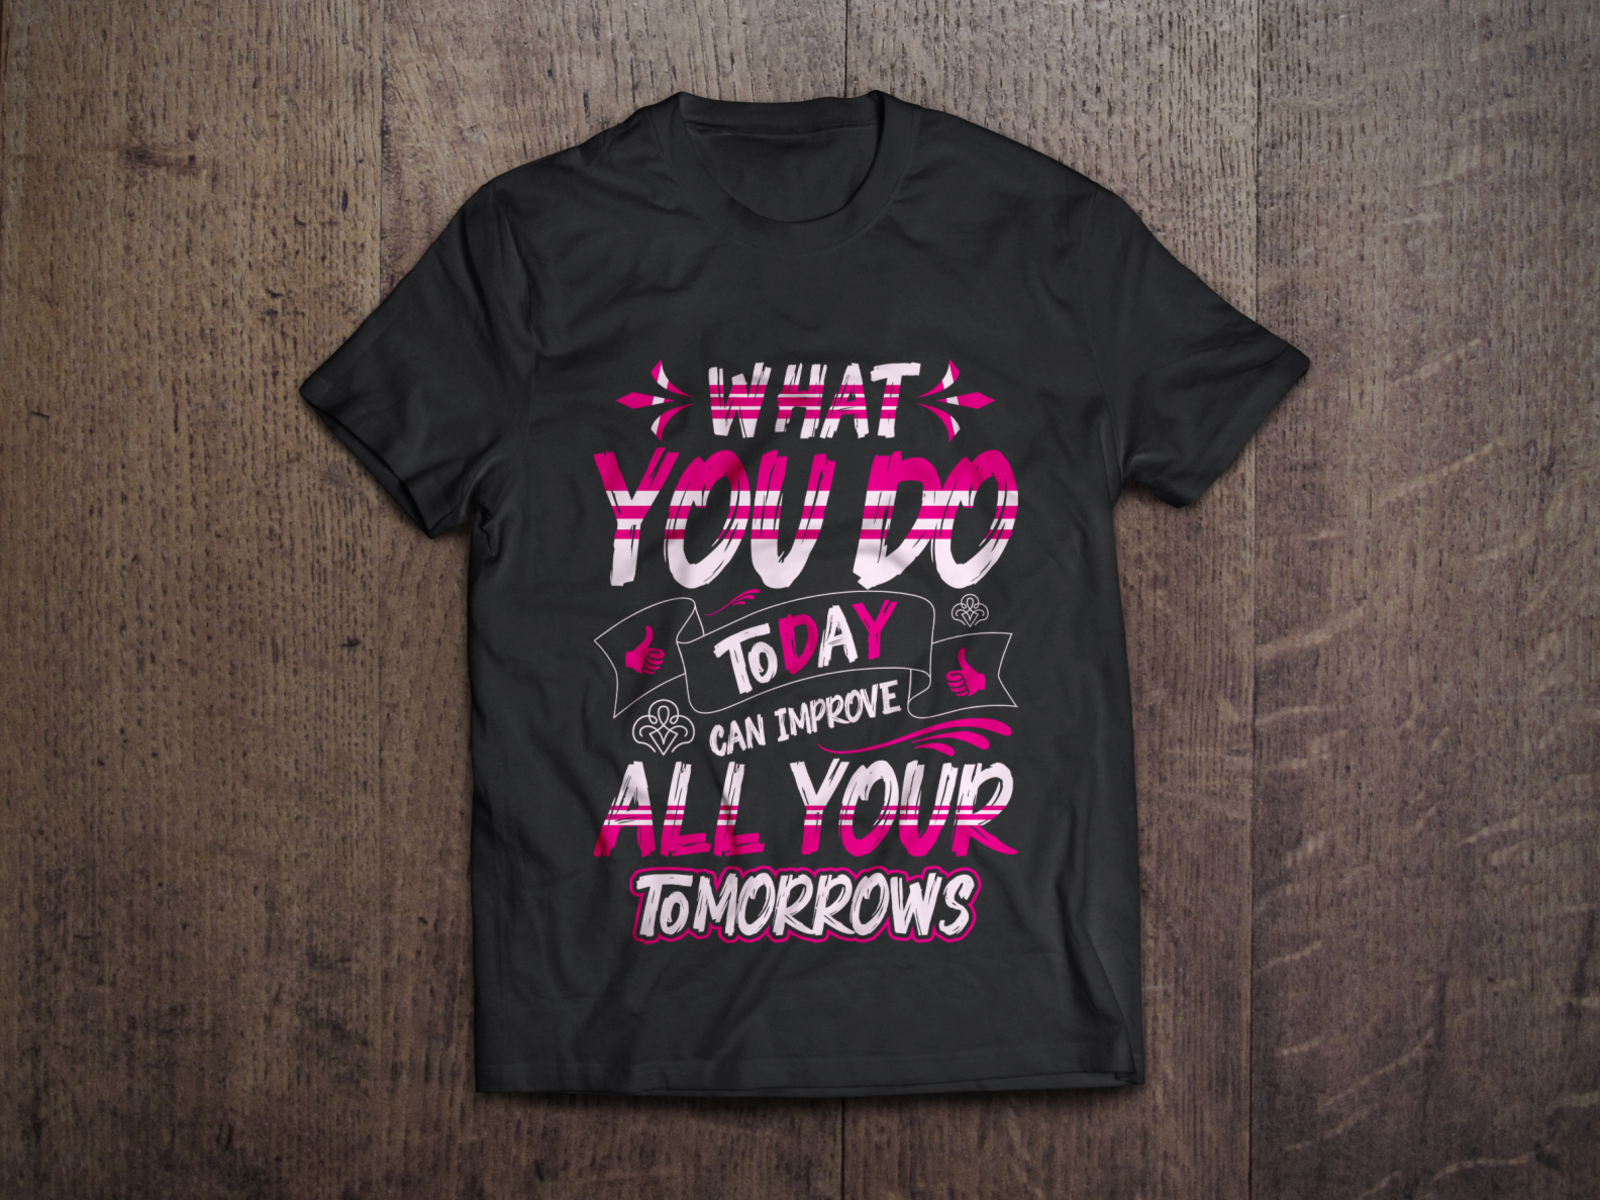 What You Do Today Can Improve All Your Tomorrows T Shirt Design By Md Ibrahim Ali On Dribbble